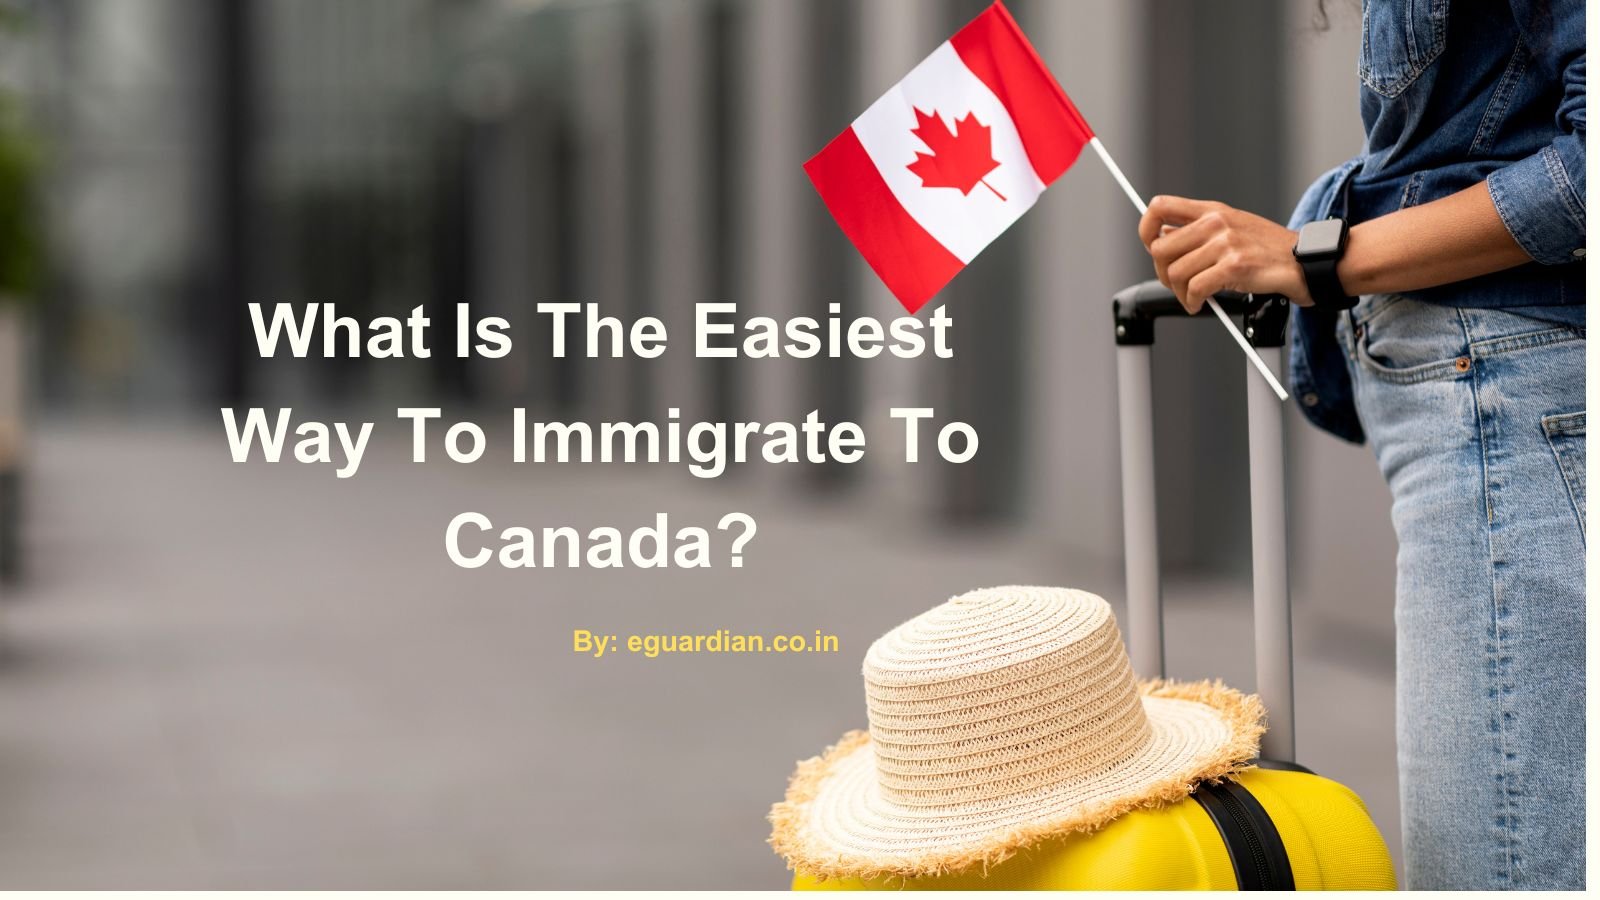 What Is The Easiest Way To Immigrate To Canada